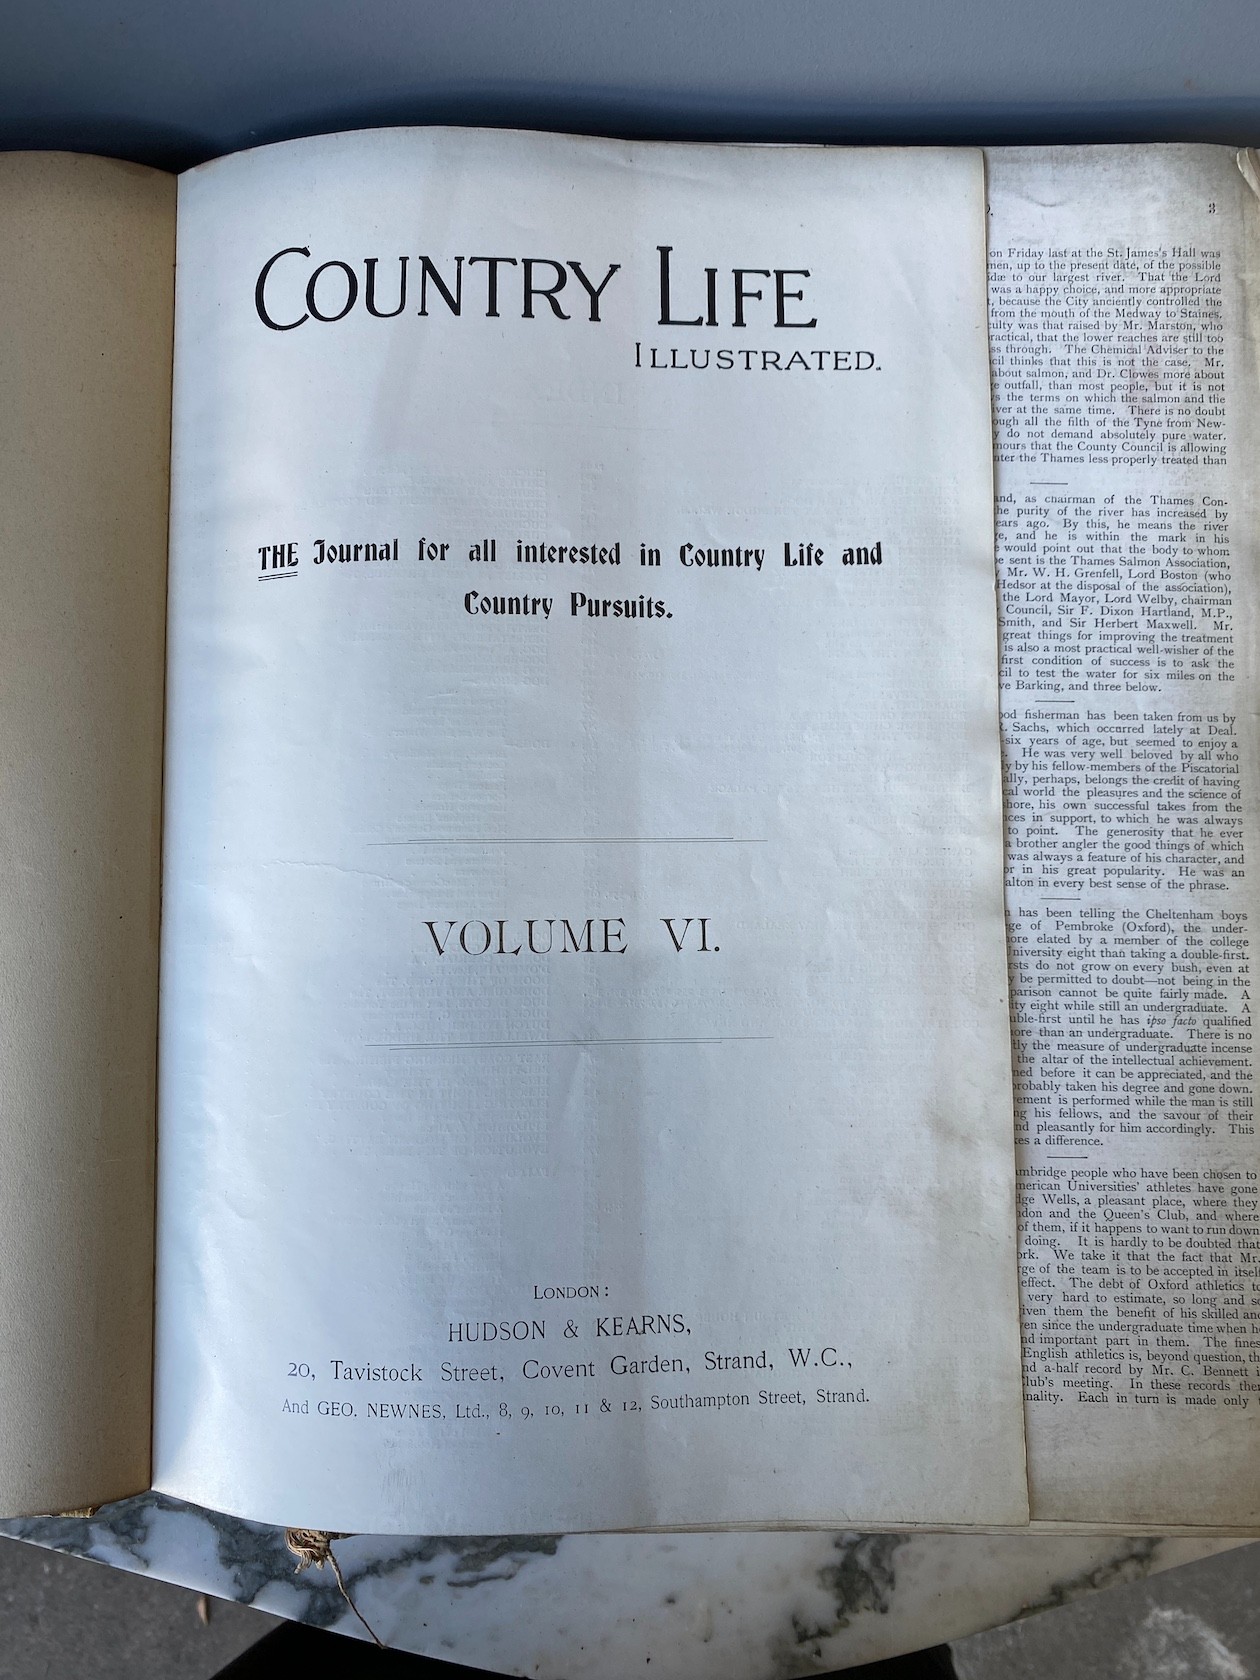 Country Life, vol.1-166 but lacking vol.34, 1897-1979 and various other later issues. *Please note the sale commences at 9am.